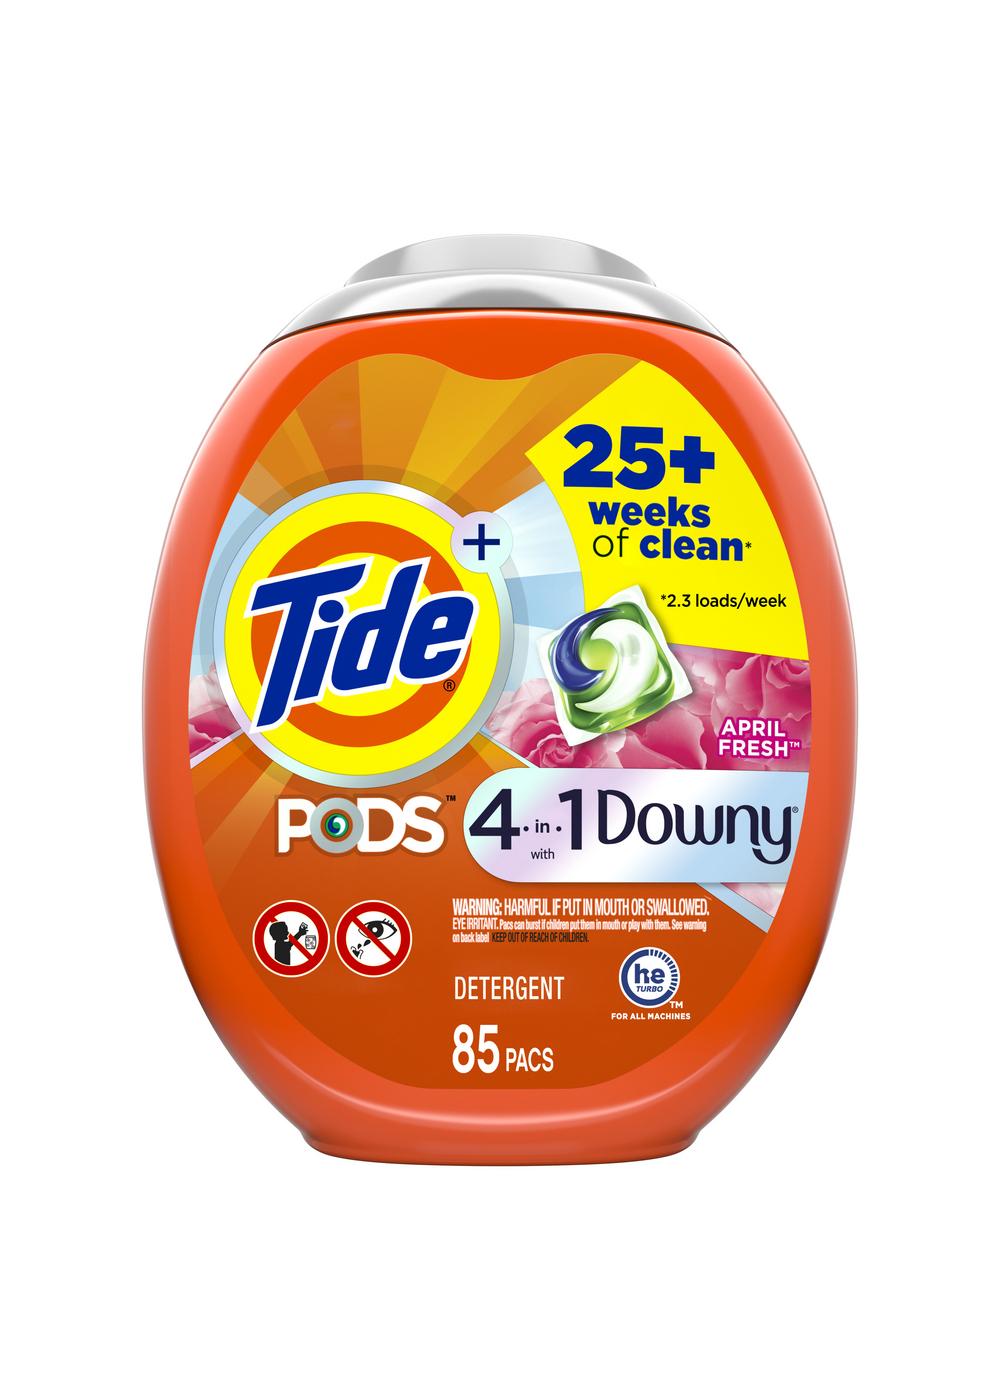 Tide PODS Plus Downy April Fresh HE Laundry Detergent Pacs; image 7 of 8